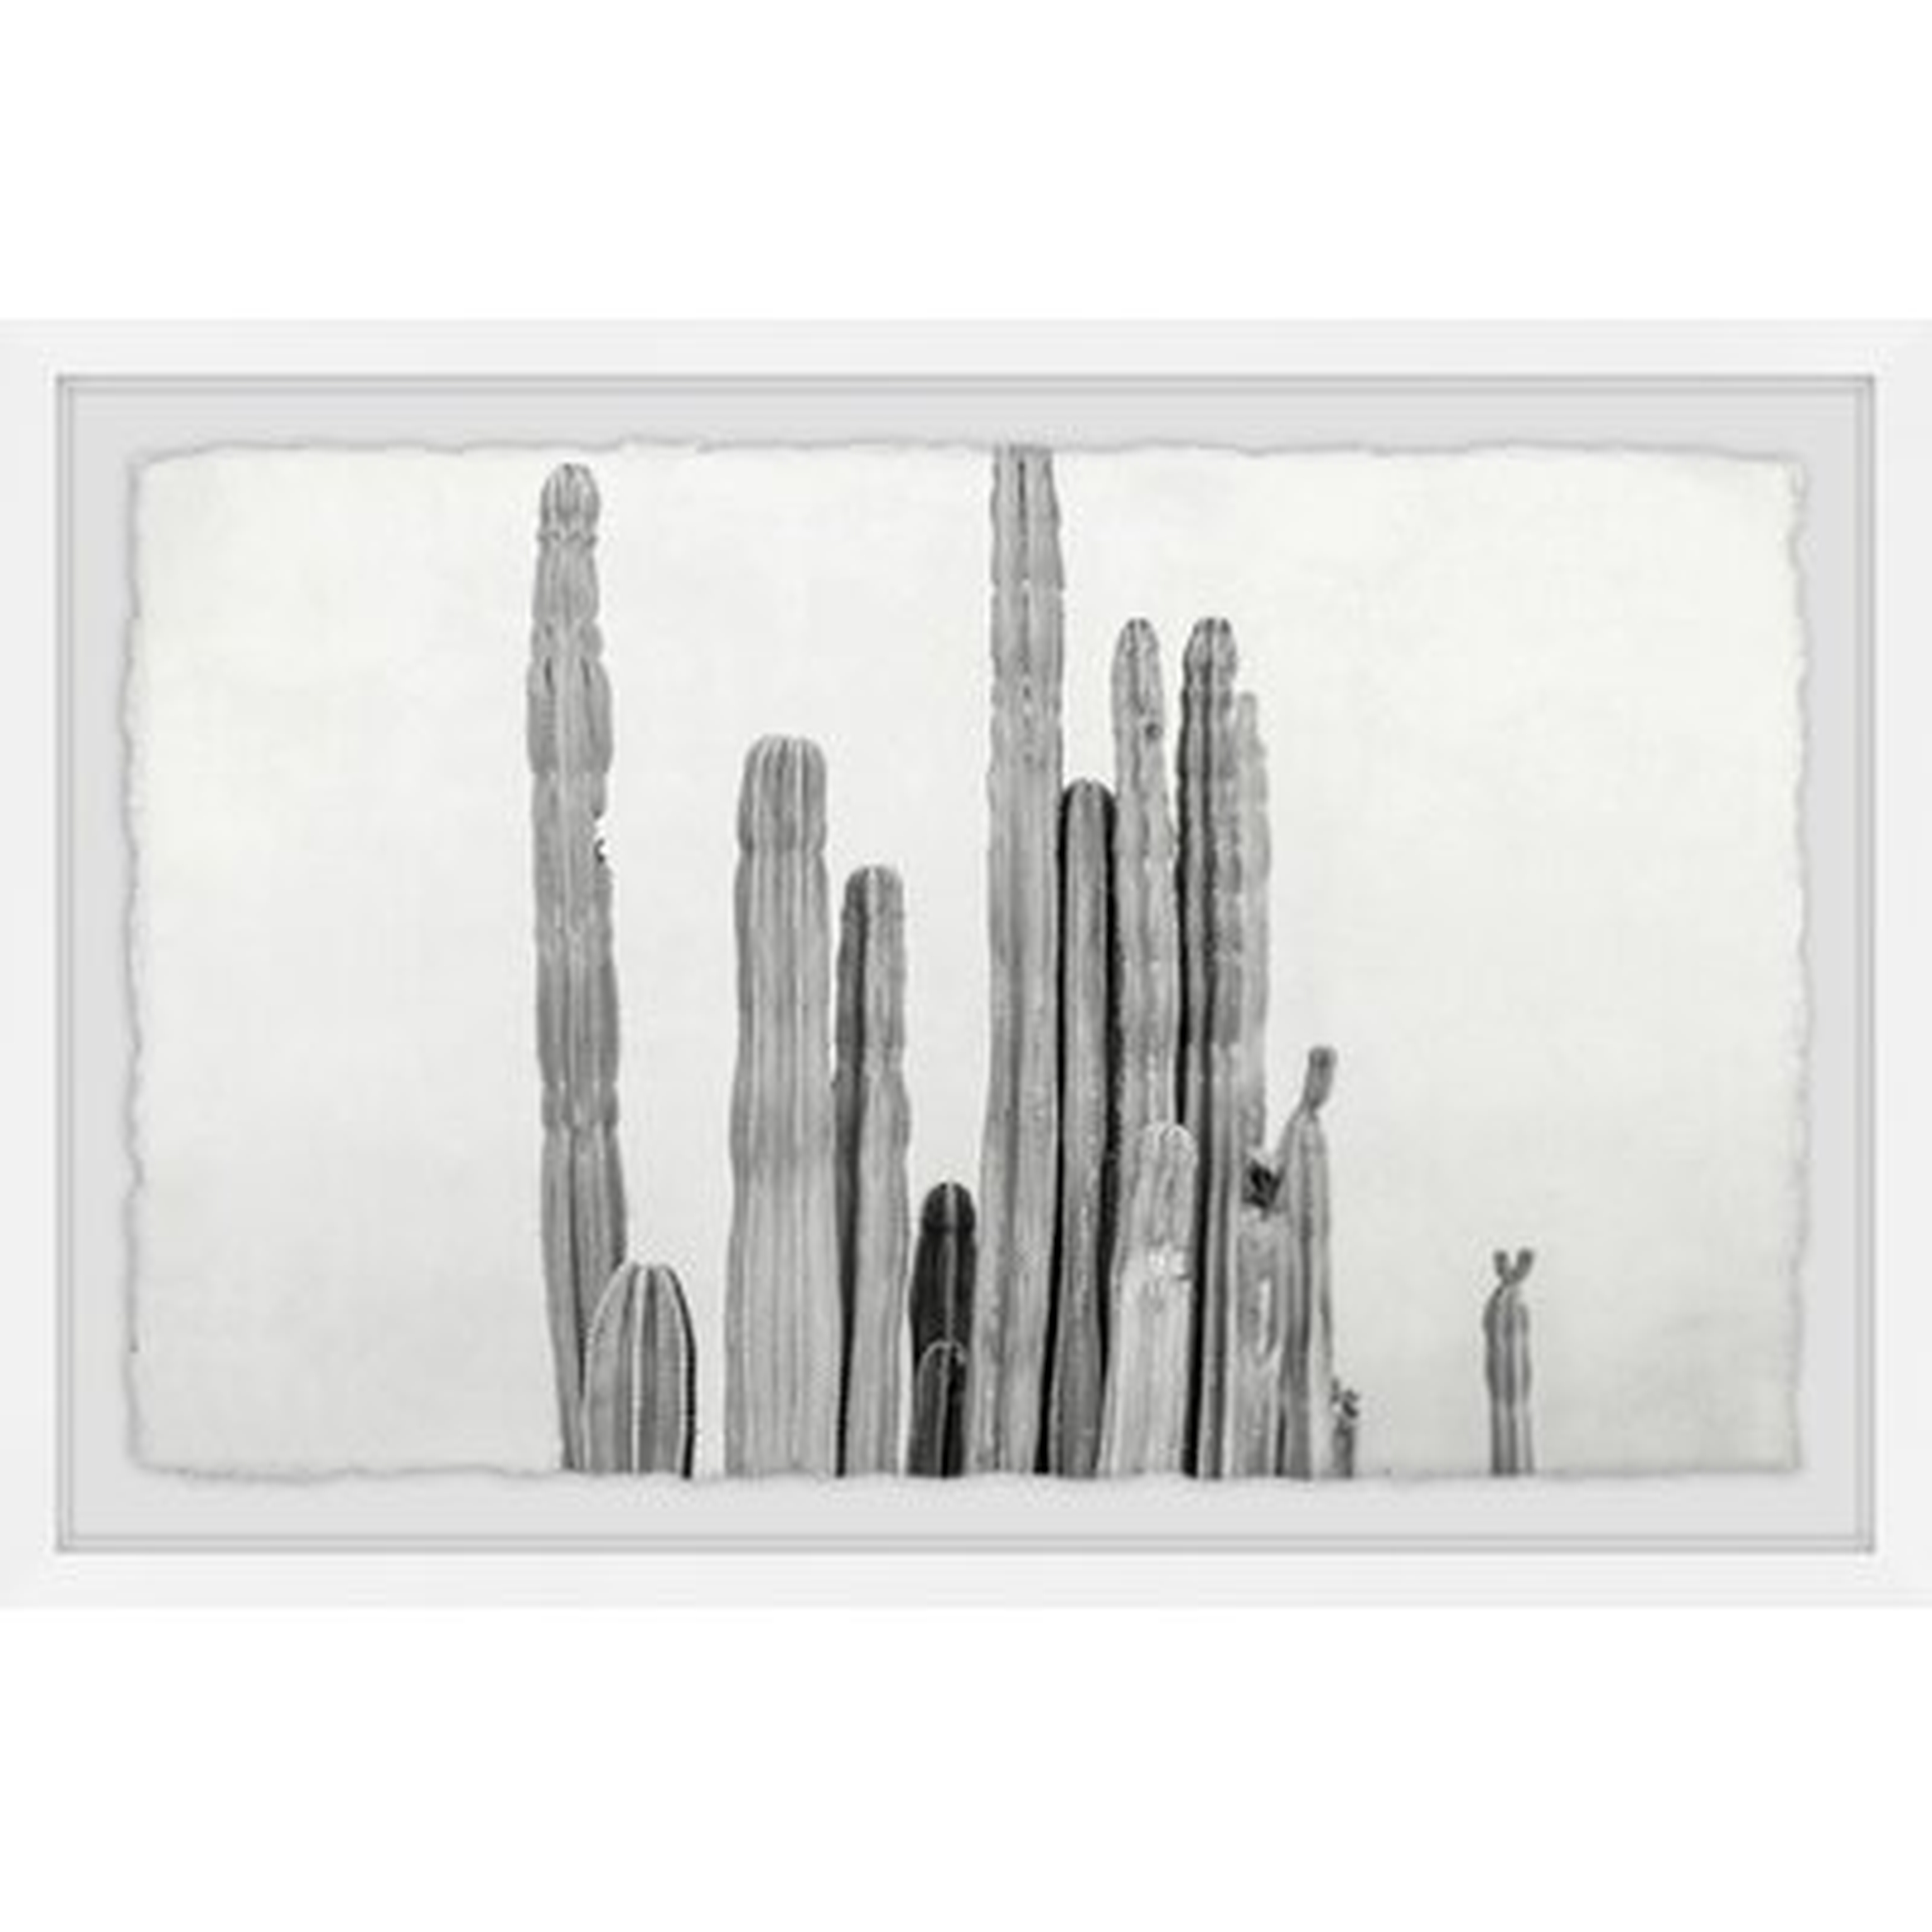 'Long and Short Cacti' - Picture Frame Graphic Art Print on Paper - Wayfair